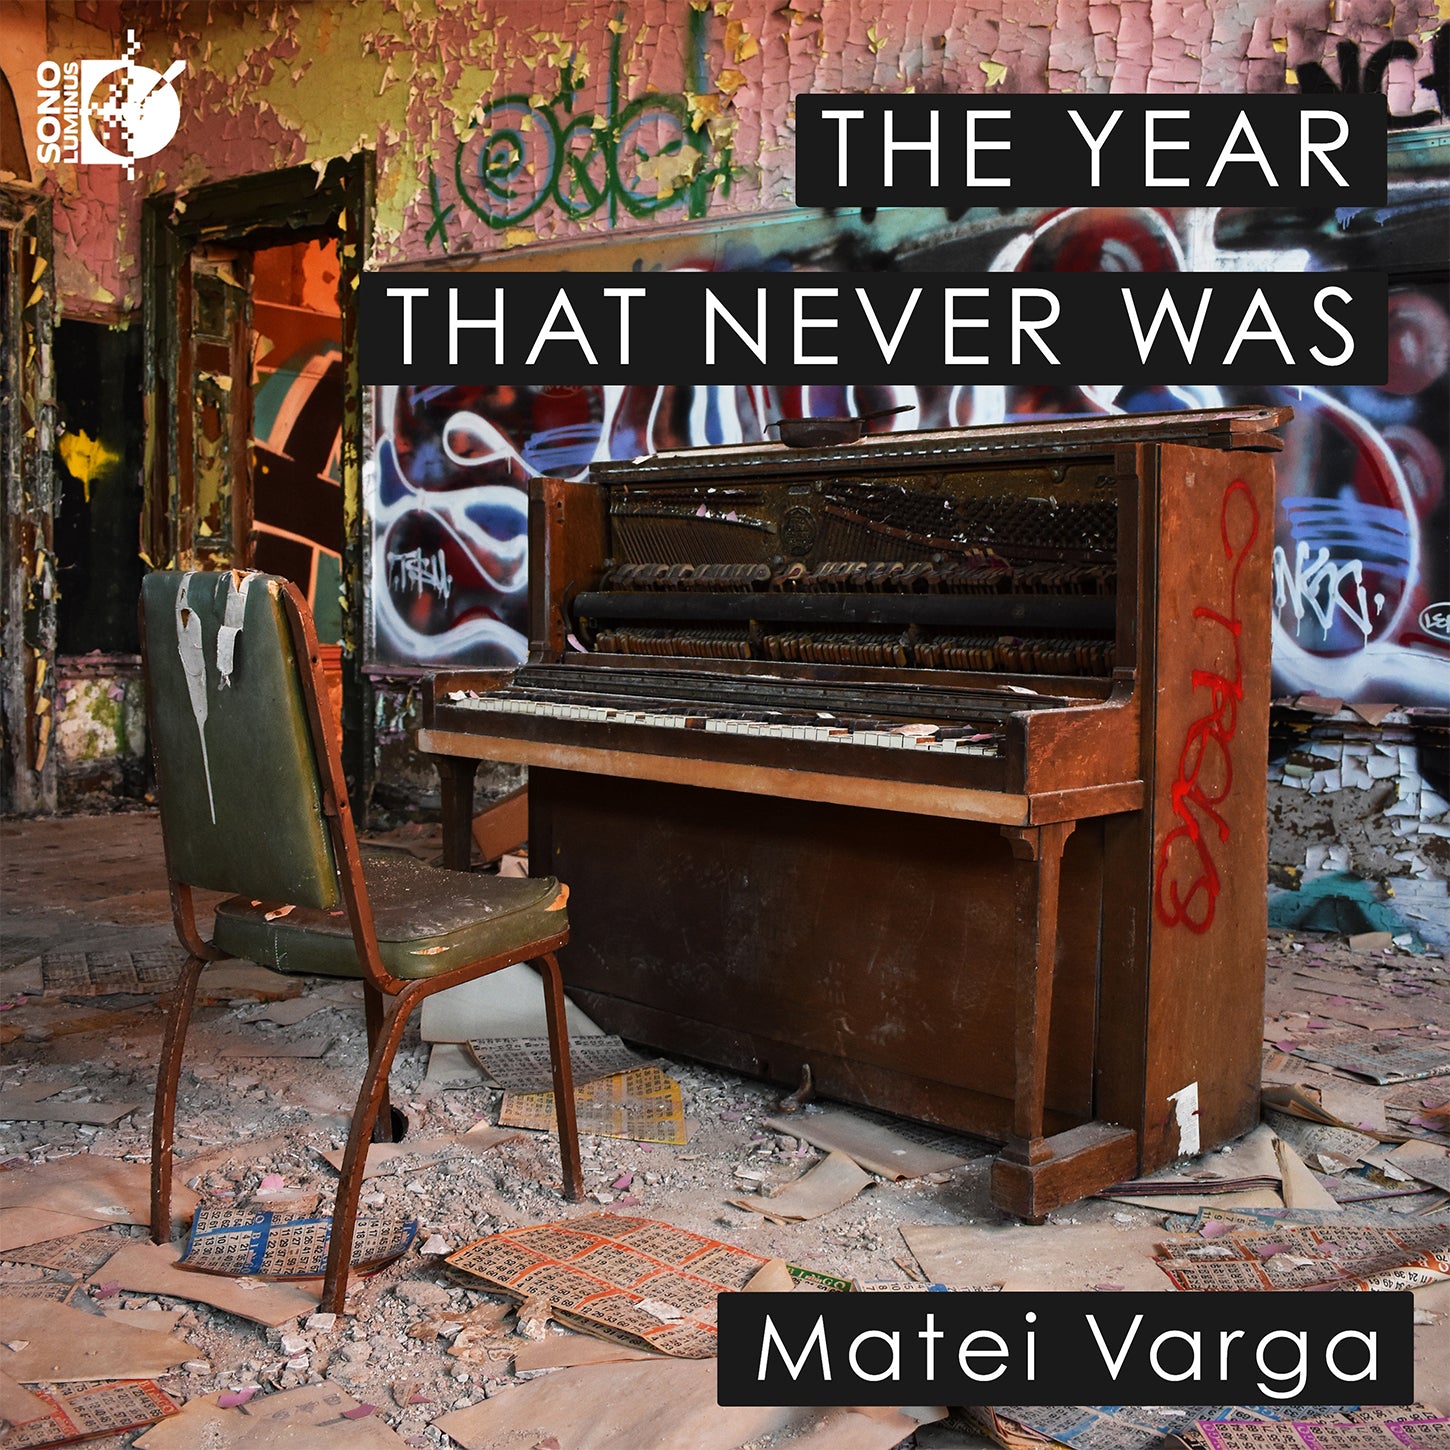 The Year That Never Was - Piano Music / Matei Varga